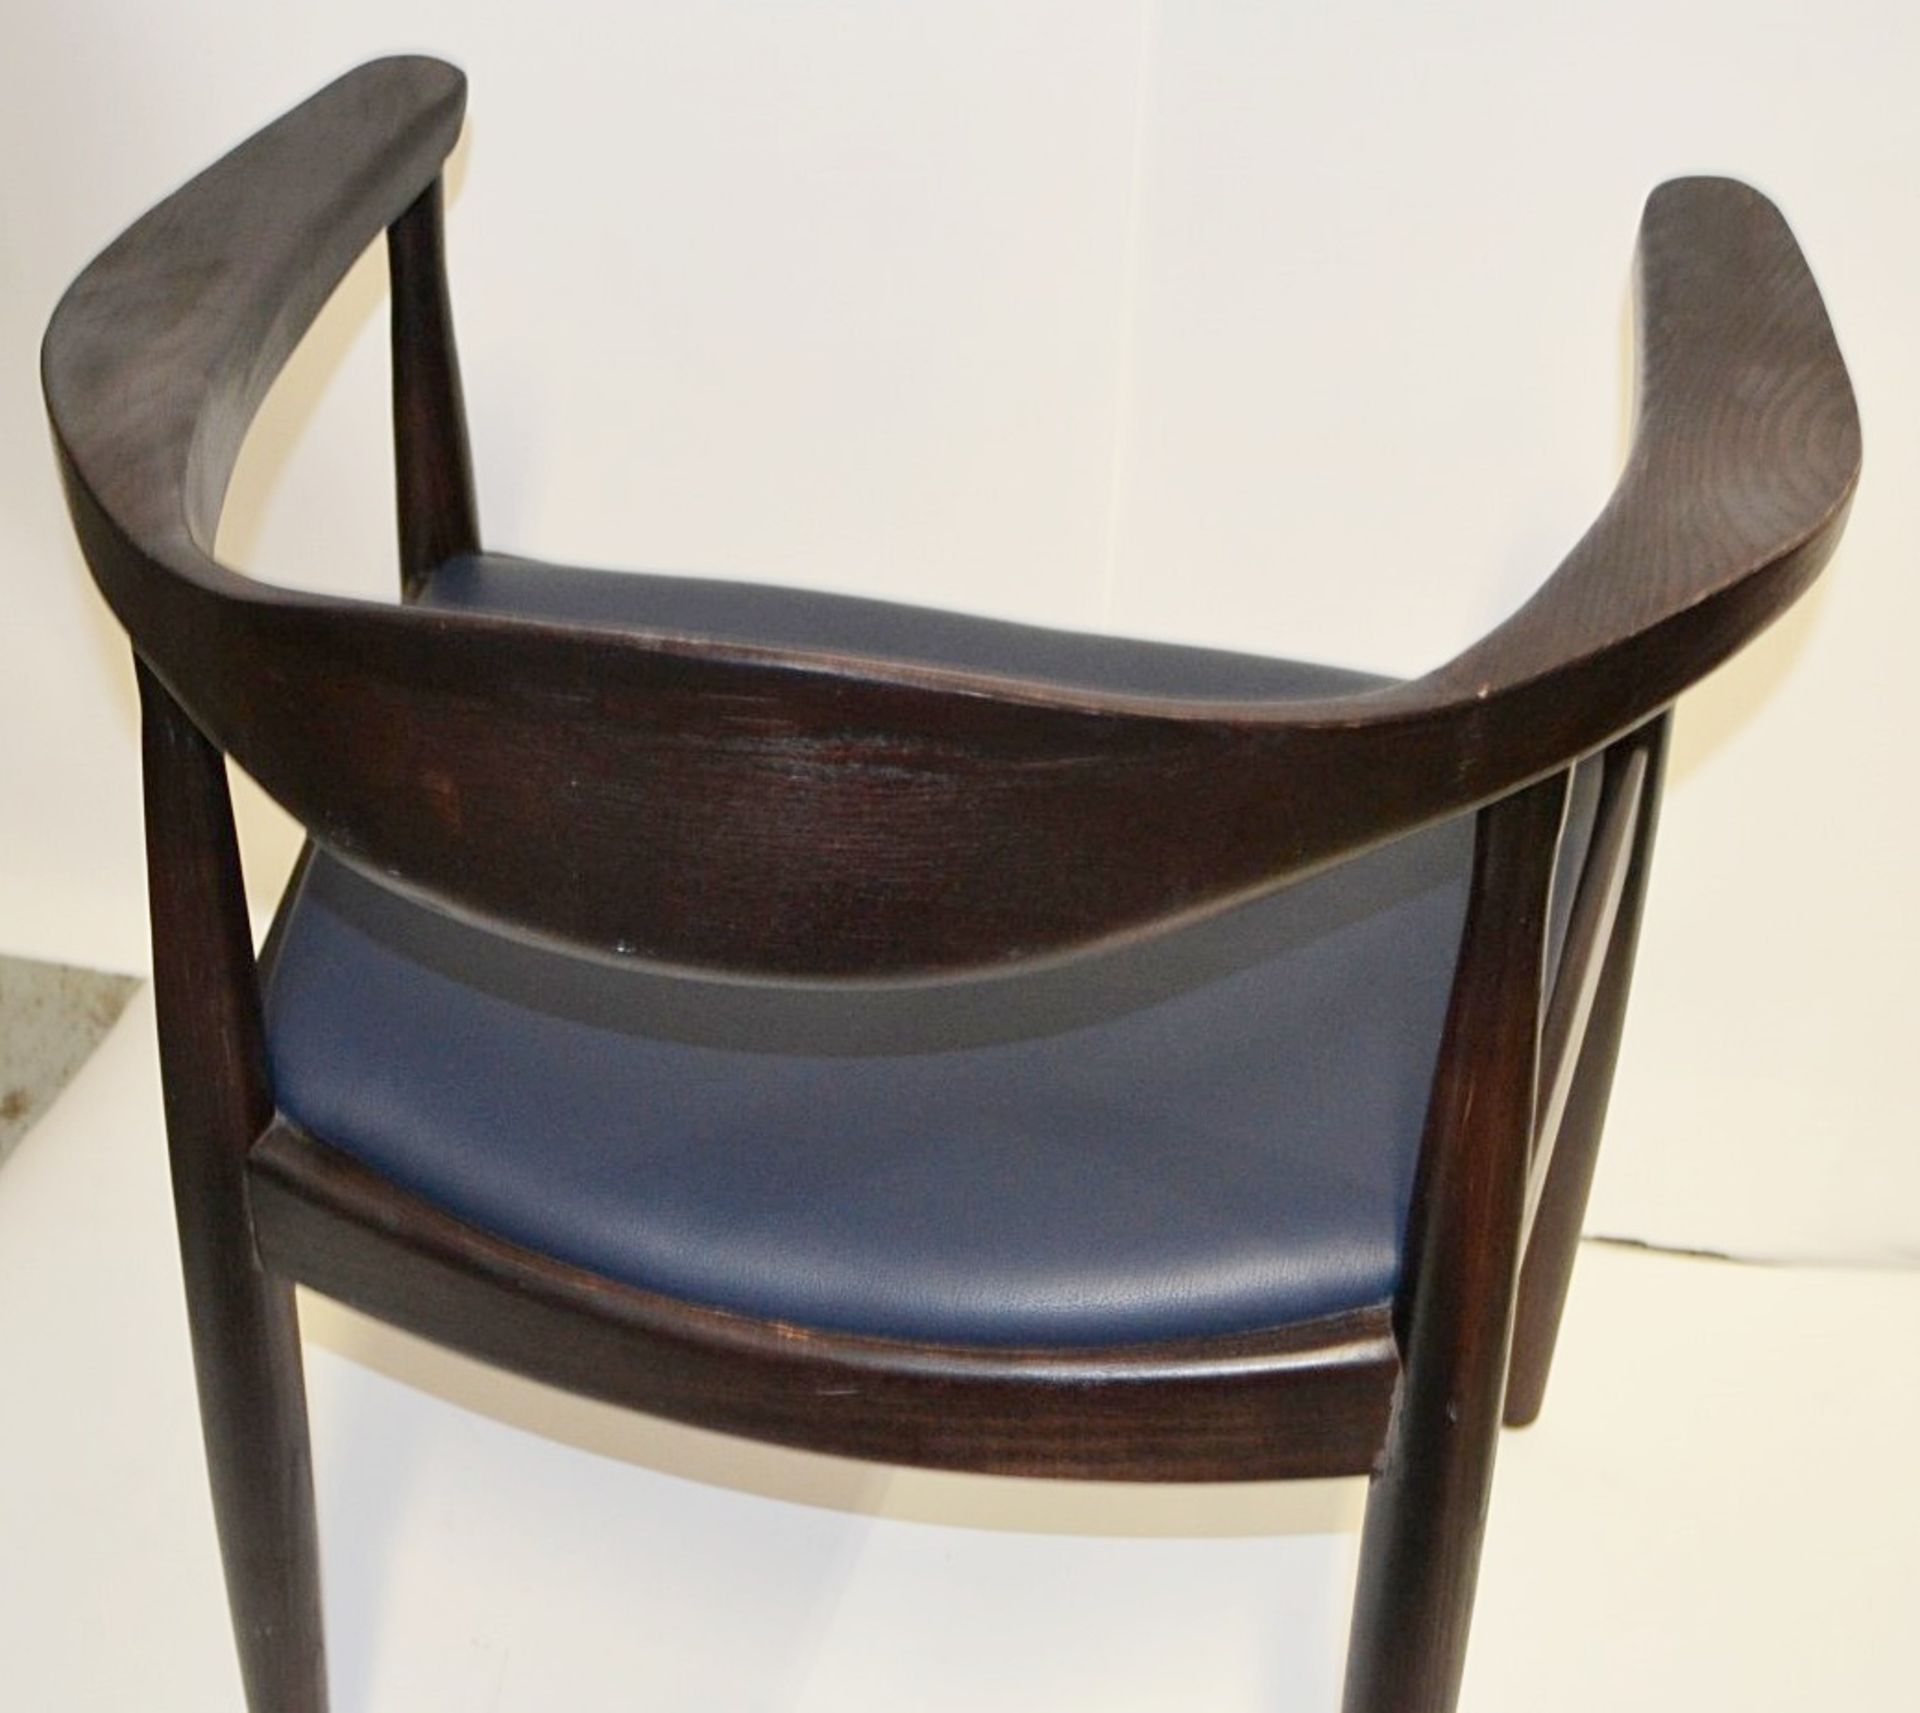 6 x Wooden Restaurant Dining Chairs - Ash Wood Dining Chairs With Dark Finish and Leather - Image 4 of 4